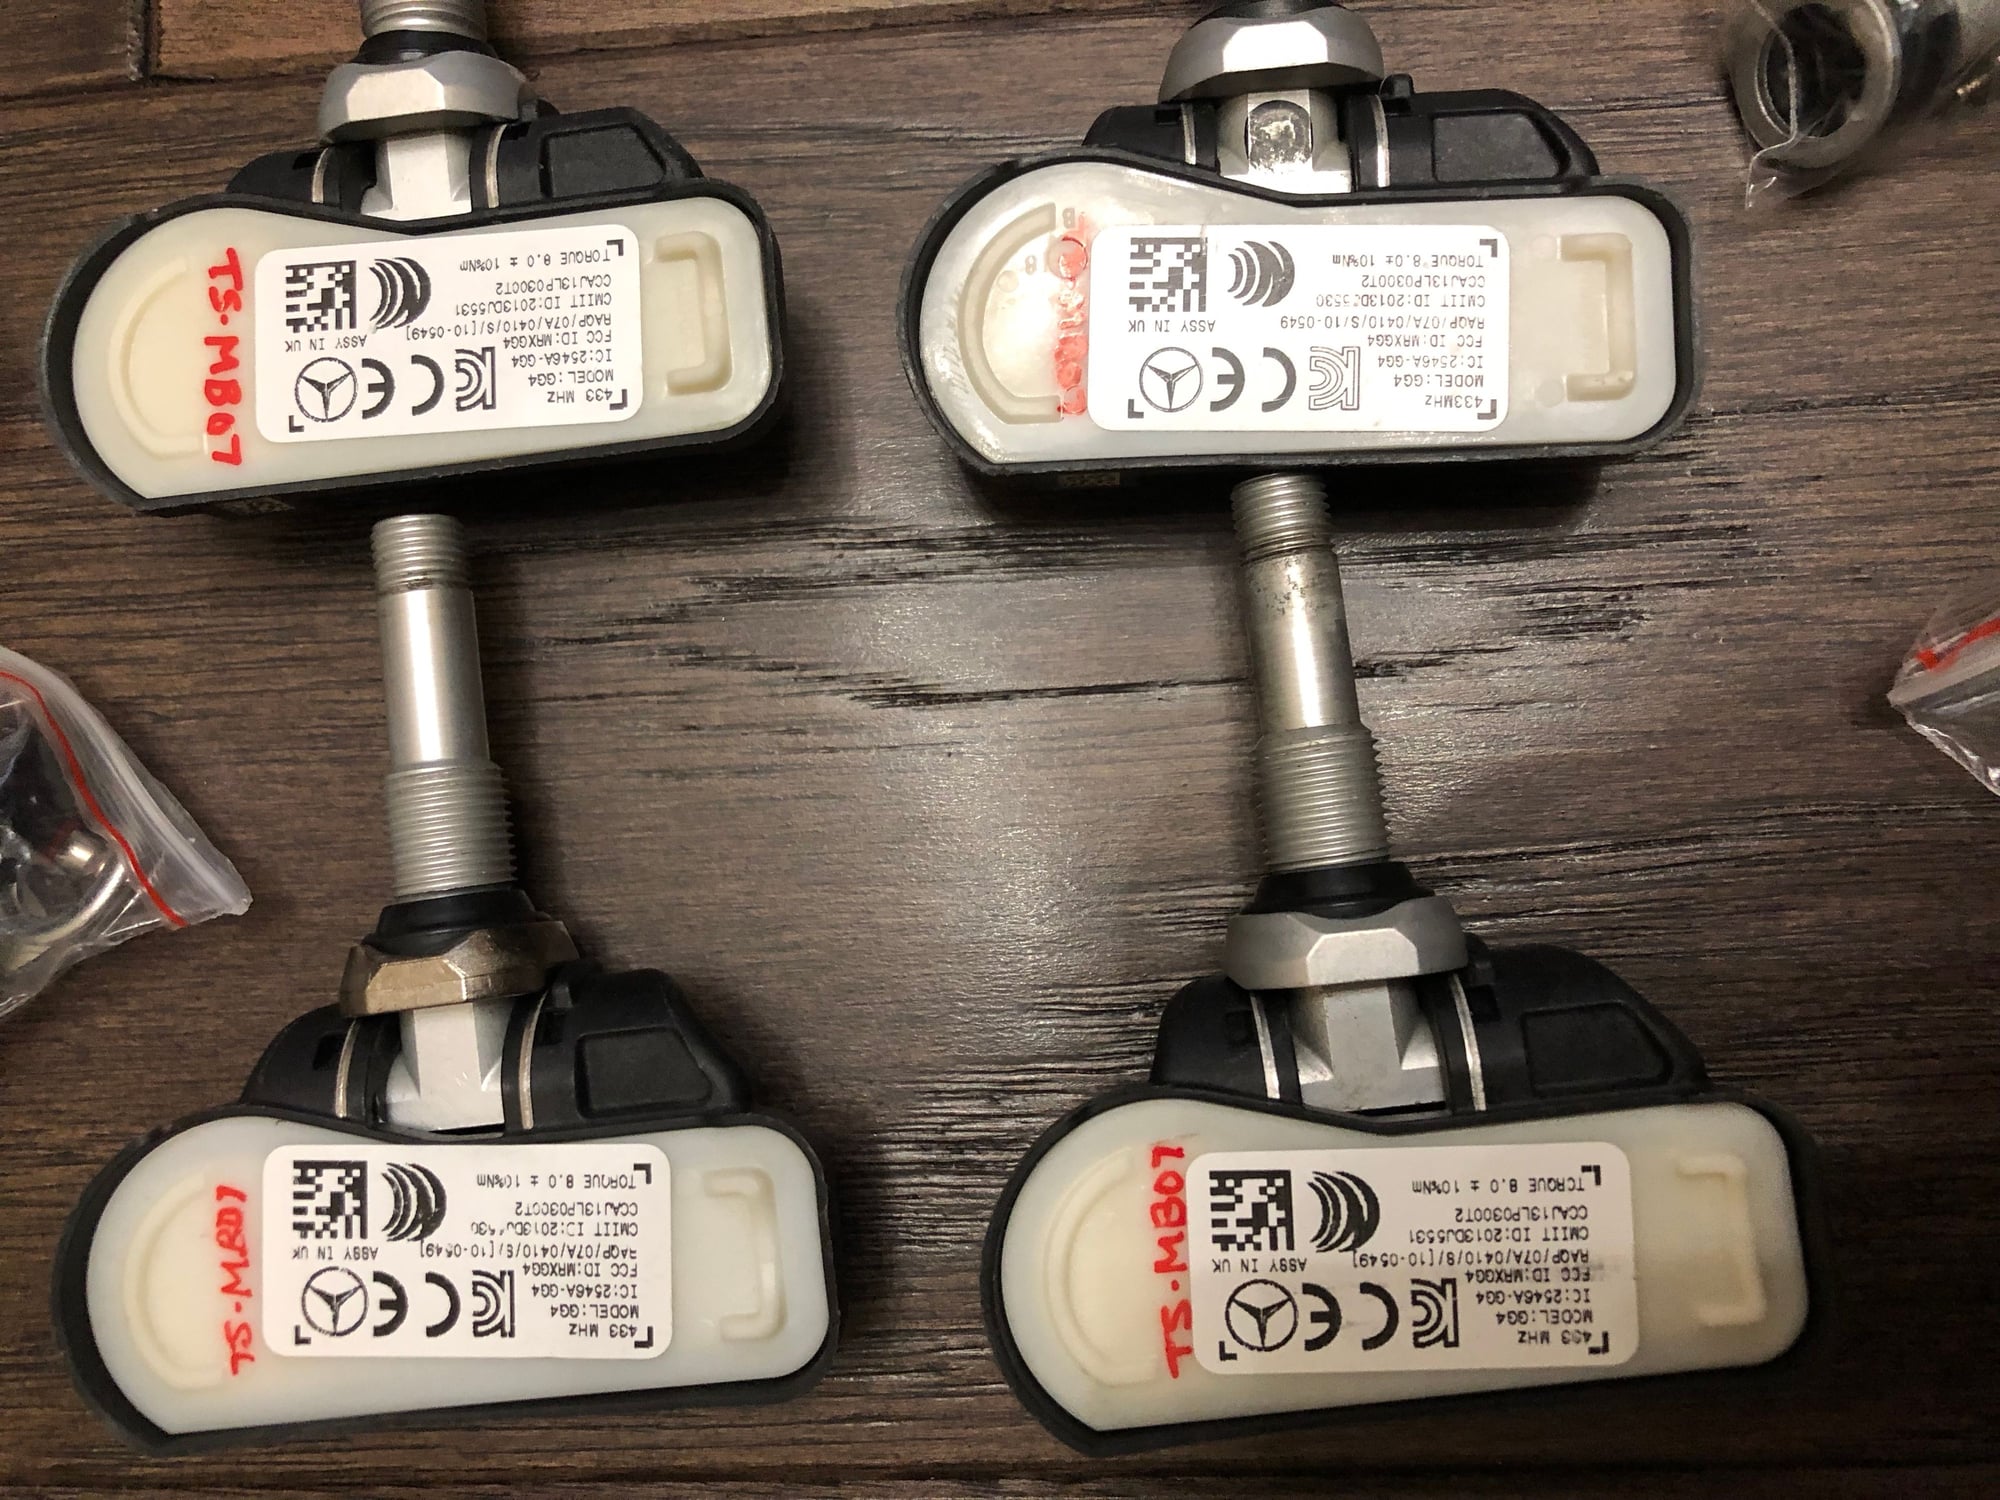 Wheels and Tires/Axles - W205 C Class OEM Tire Pressure Sensors 4x Set - Used - 2015 to 2019 Mercedes-Benz C63 AMG S - Centennial, CO 80015, United States